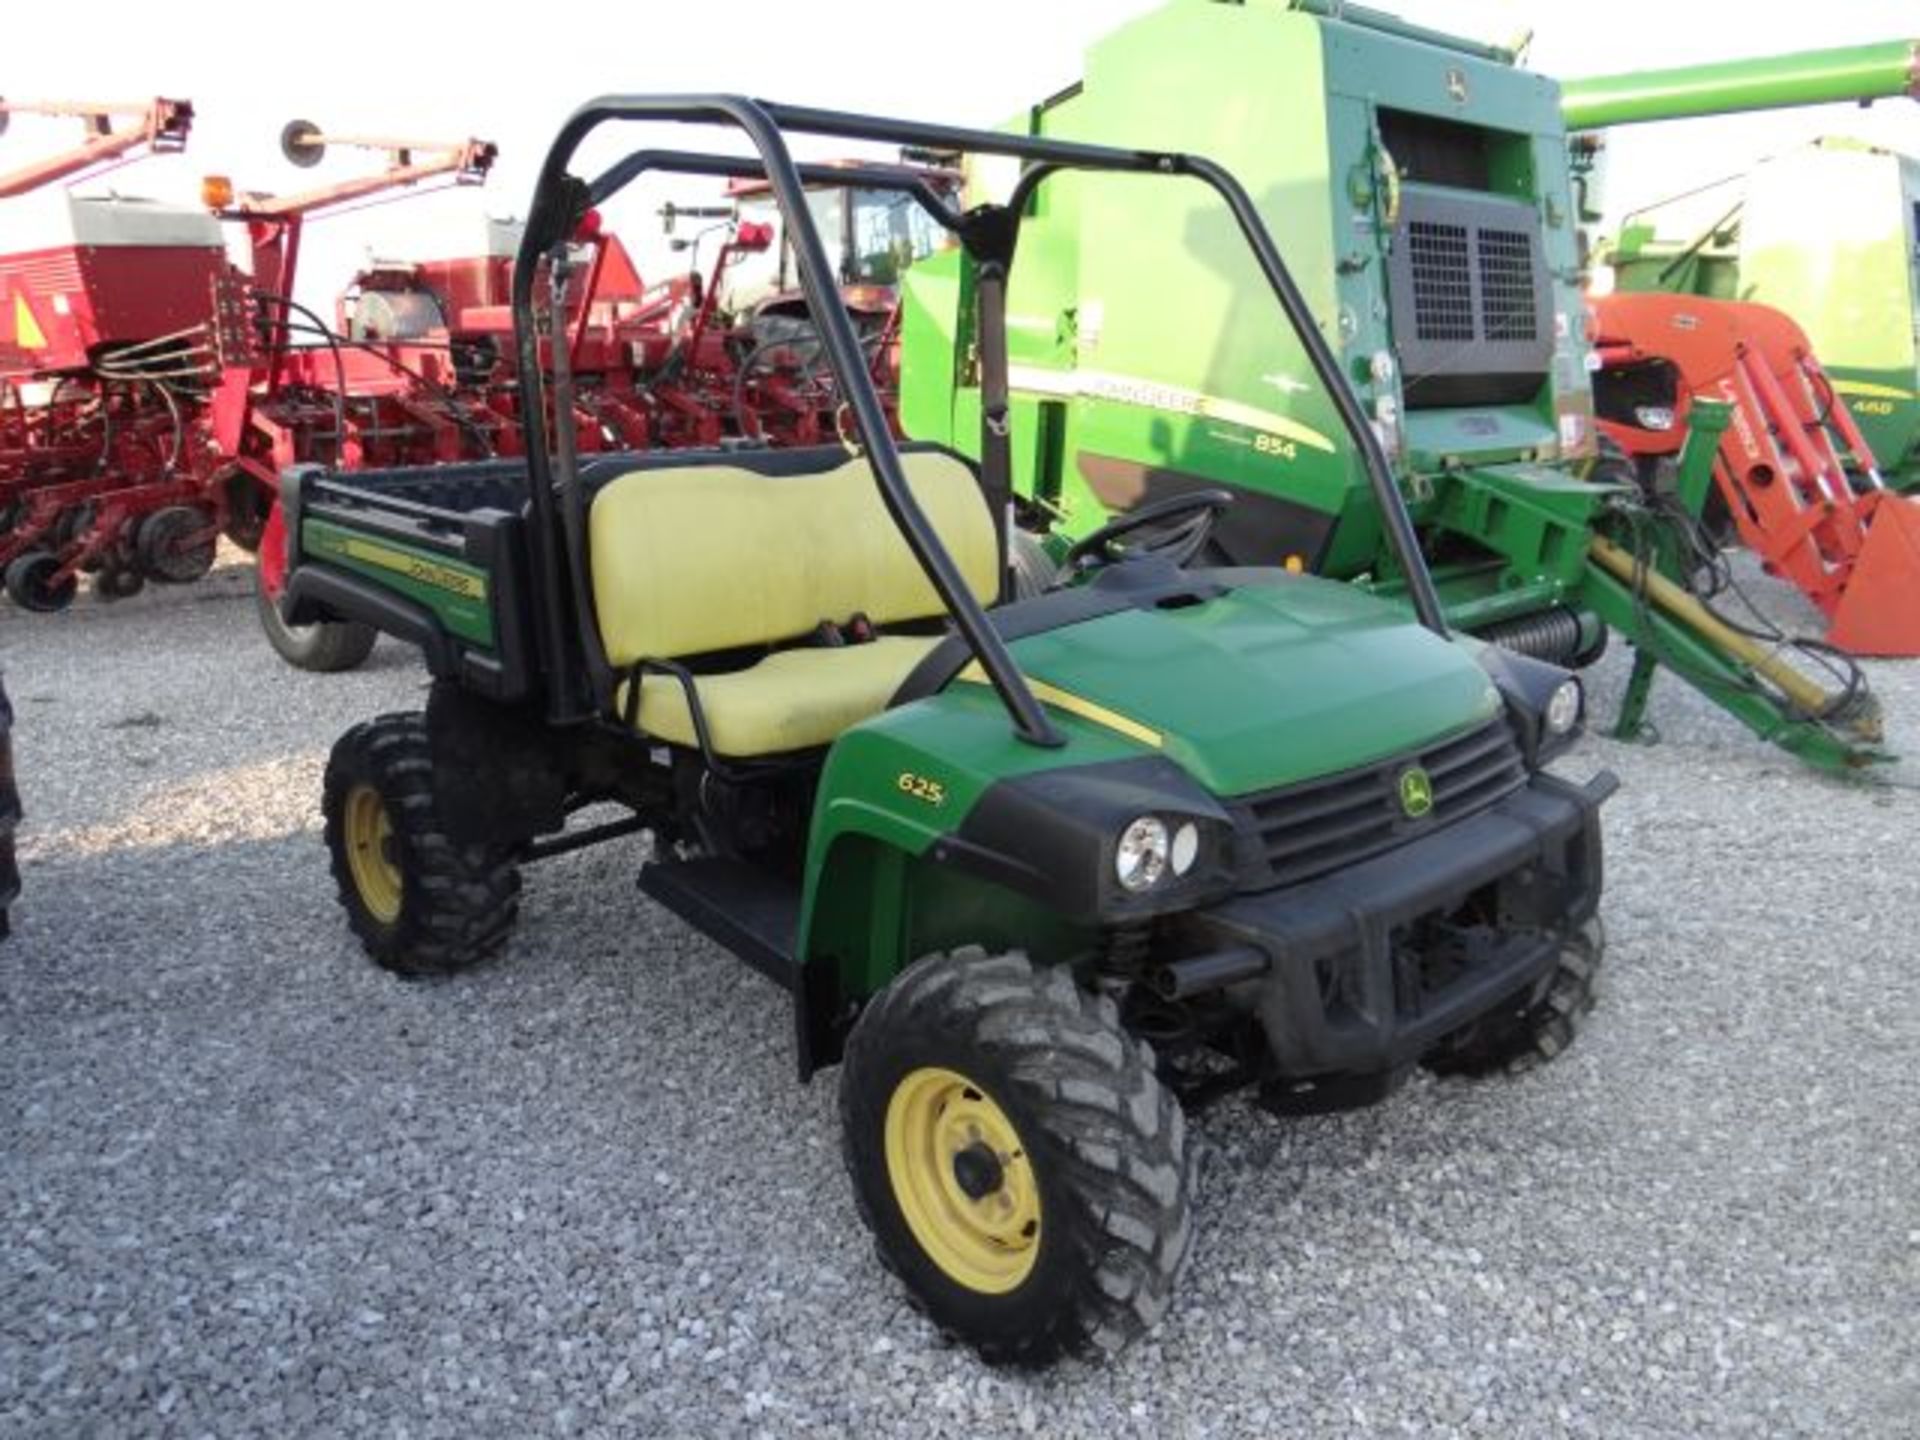 JD 625i Gator, 2011 #112652, 860 hrs, Bench Seat, ROPS - Image 2 of 4